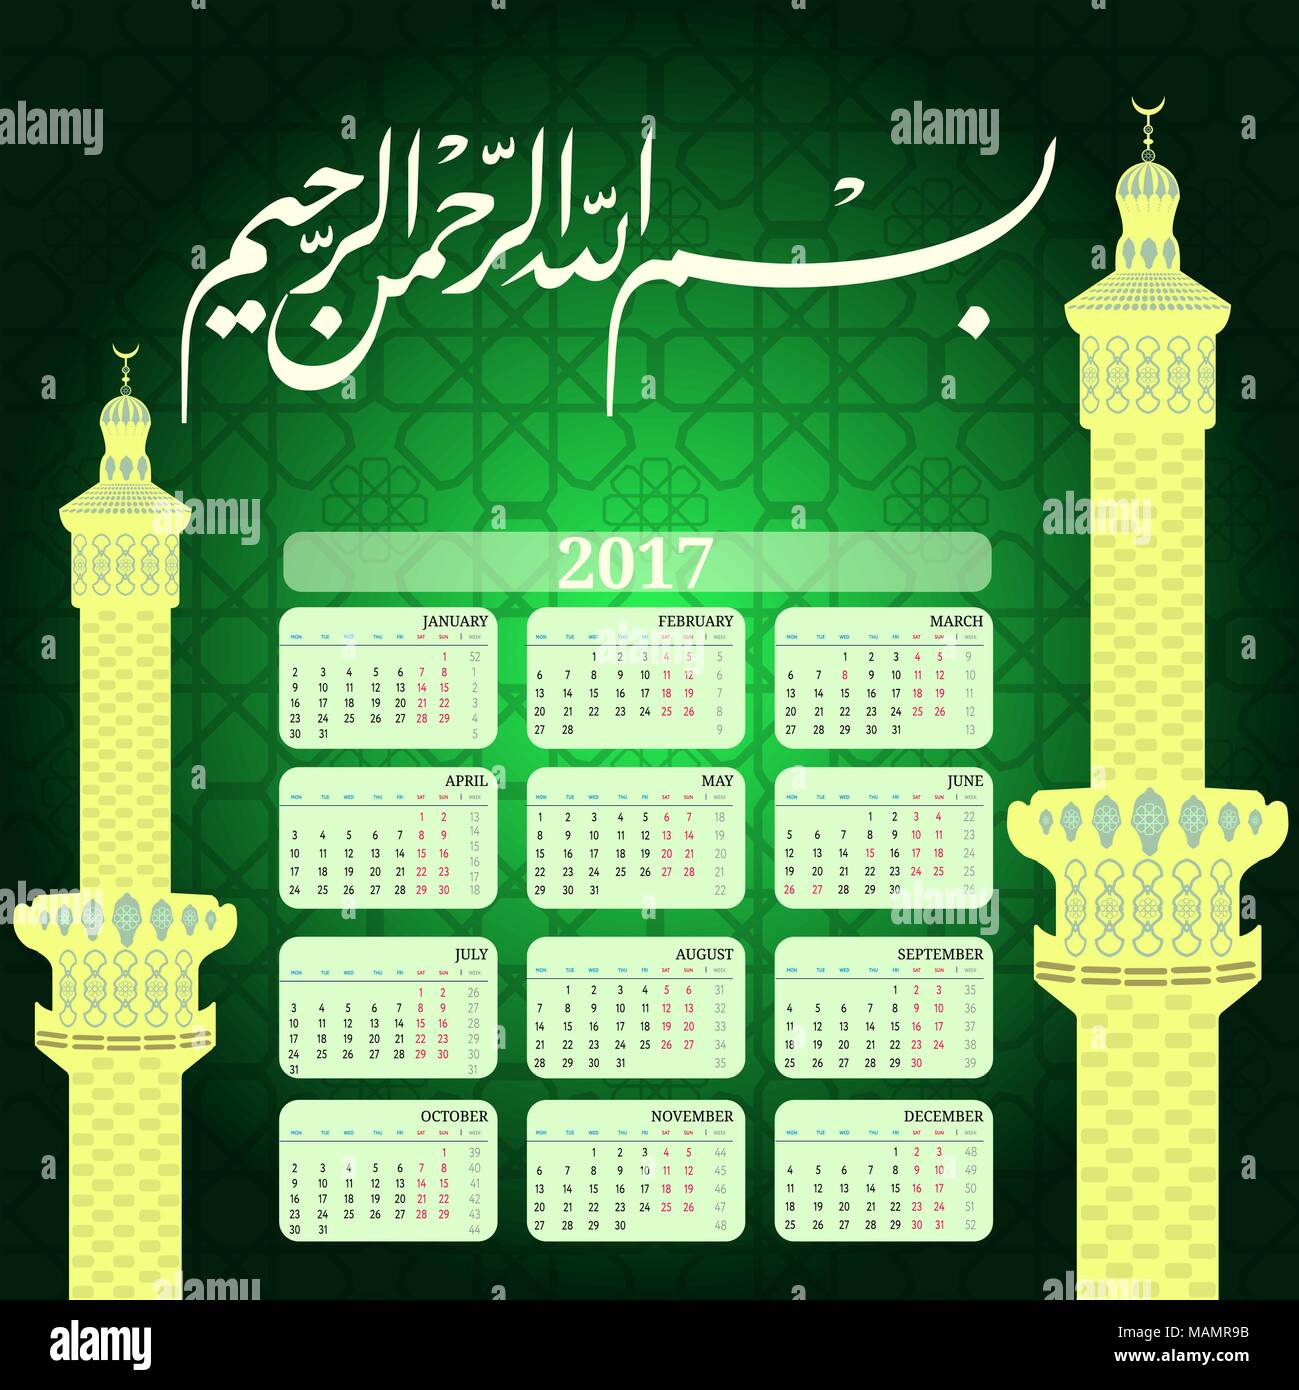 calendar-2017-with-islamic-background-and-mosque-translation-of-arabic